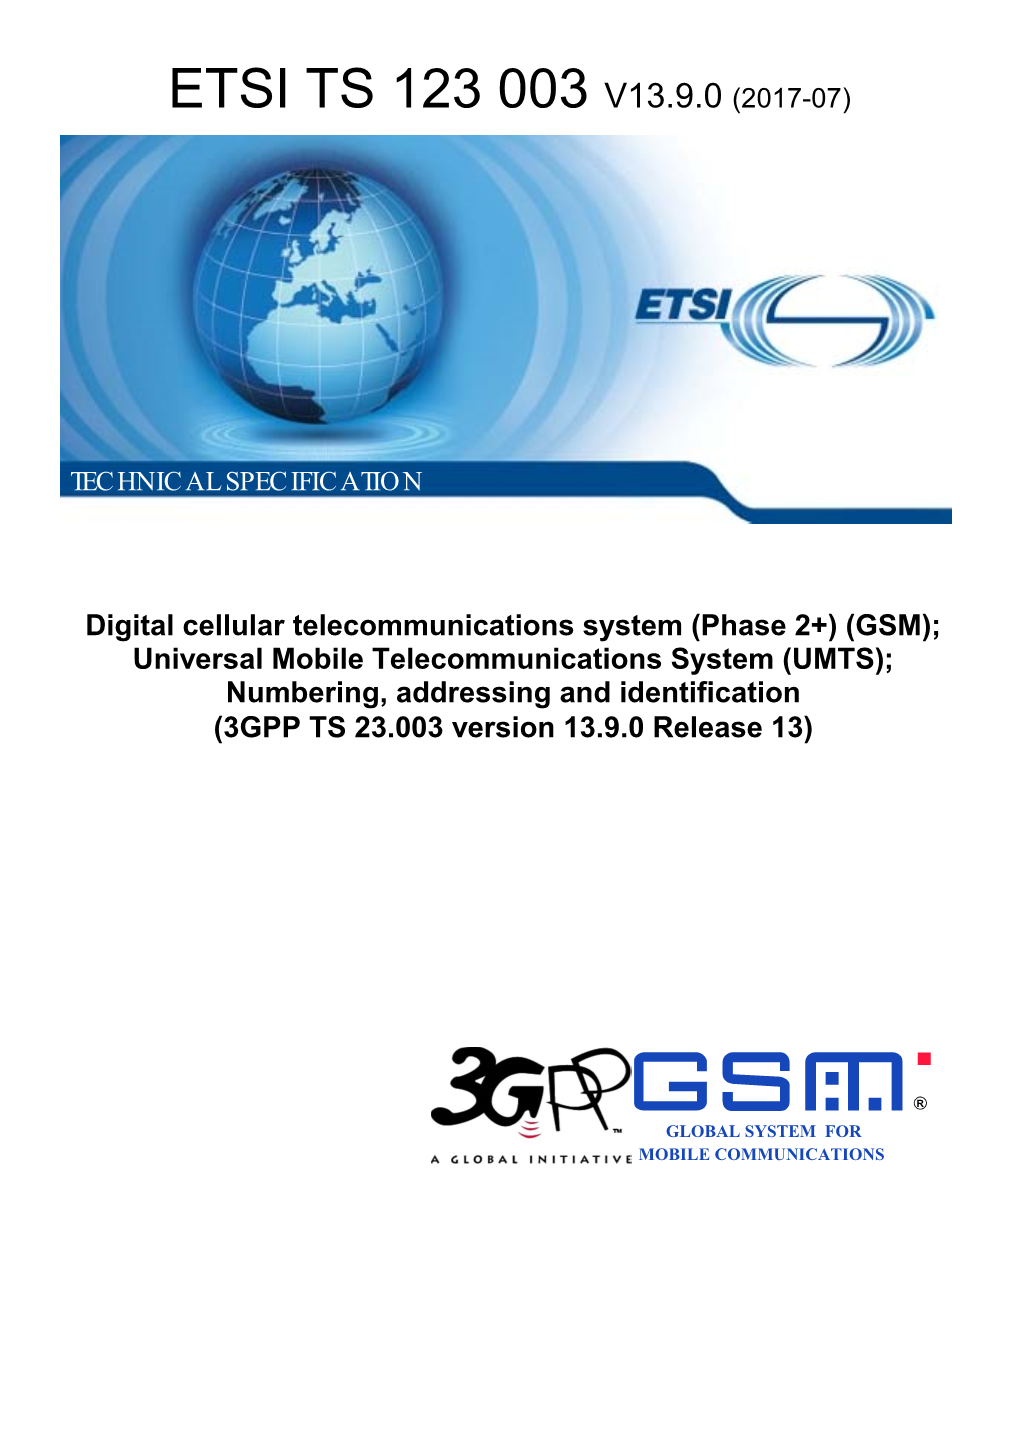 GSM); Universal Mobile Telecommunications System (UMTS); Numbering, Addressing and Identification (3GPP TS 23.003 Version 13.9.0 Release 13)